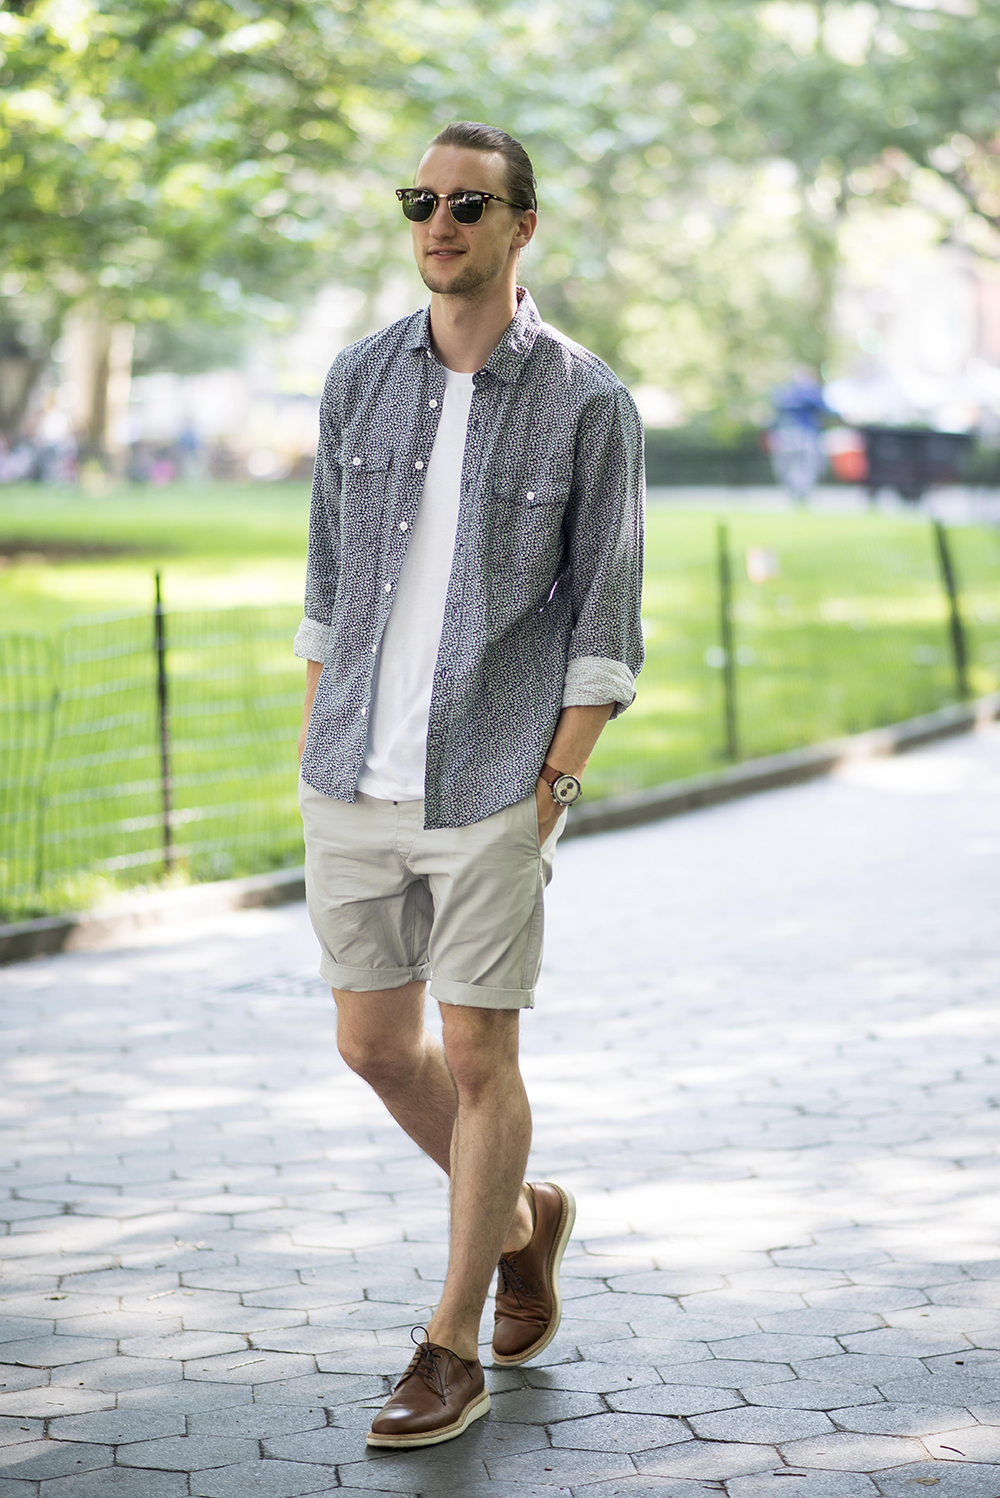 1000+ images about Men's Fashion (Spring/Summer) on Pinterest